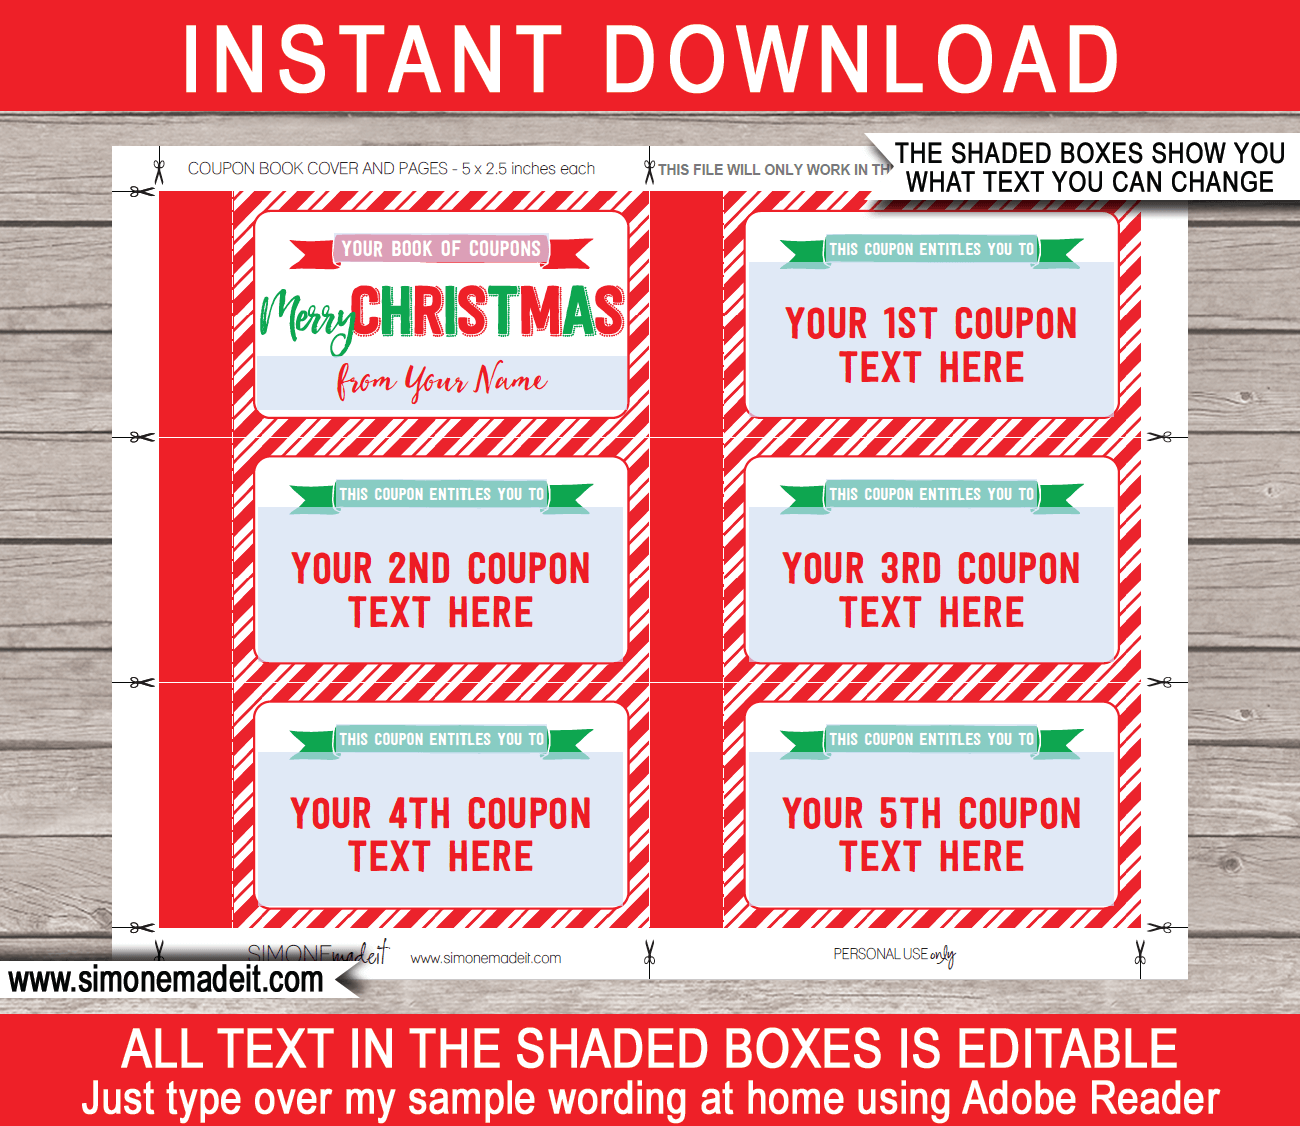 Coupon Template Christmas from www.giftsbysimonemadeit.com